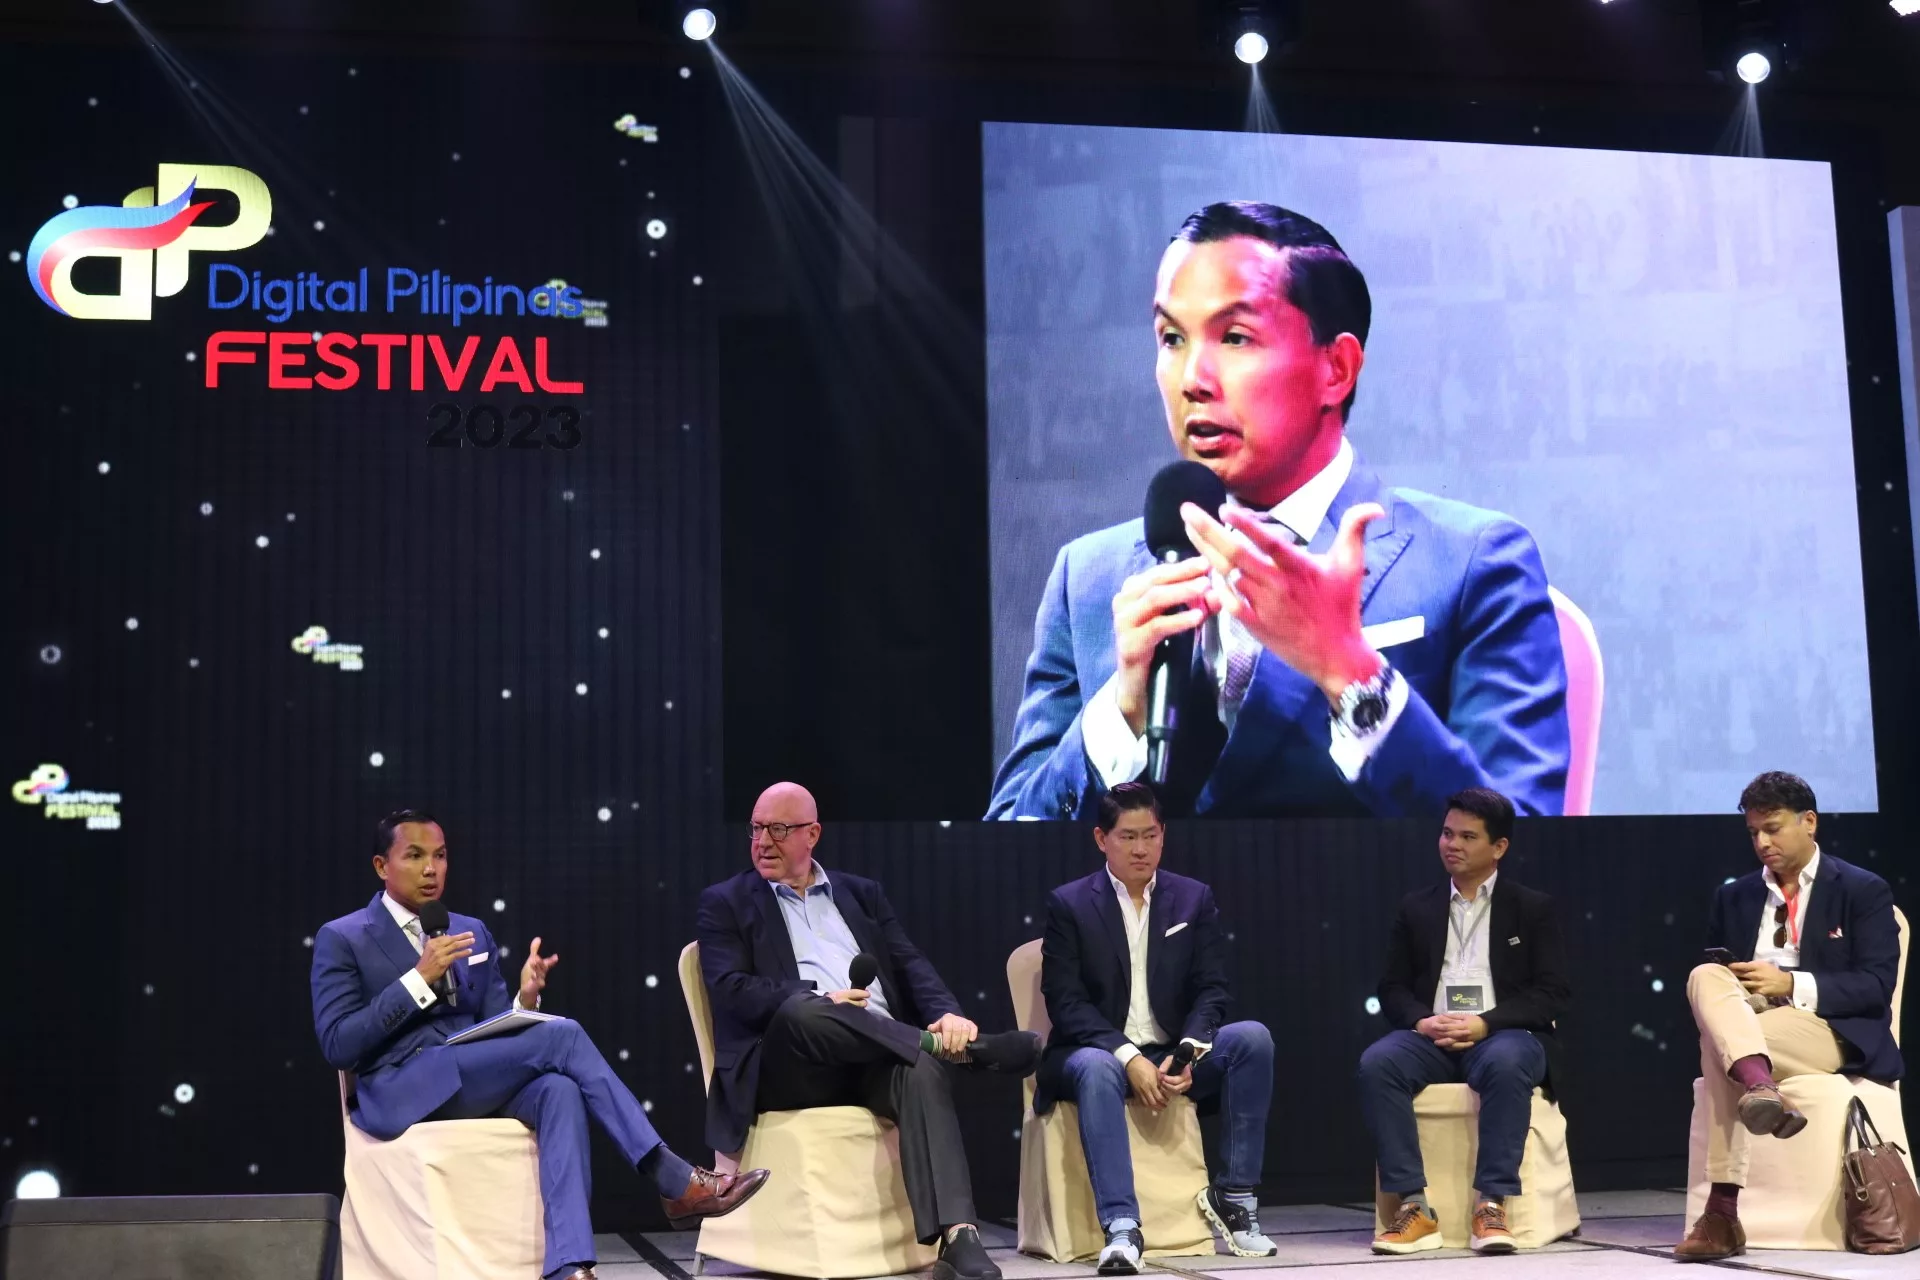 Digital Pilipinas - ASEAN startup landscape in the Philippines panelists